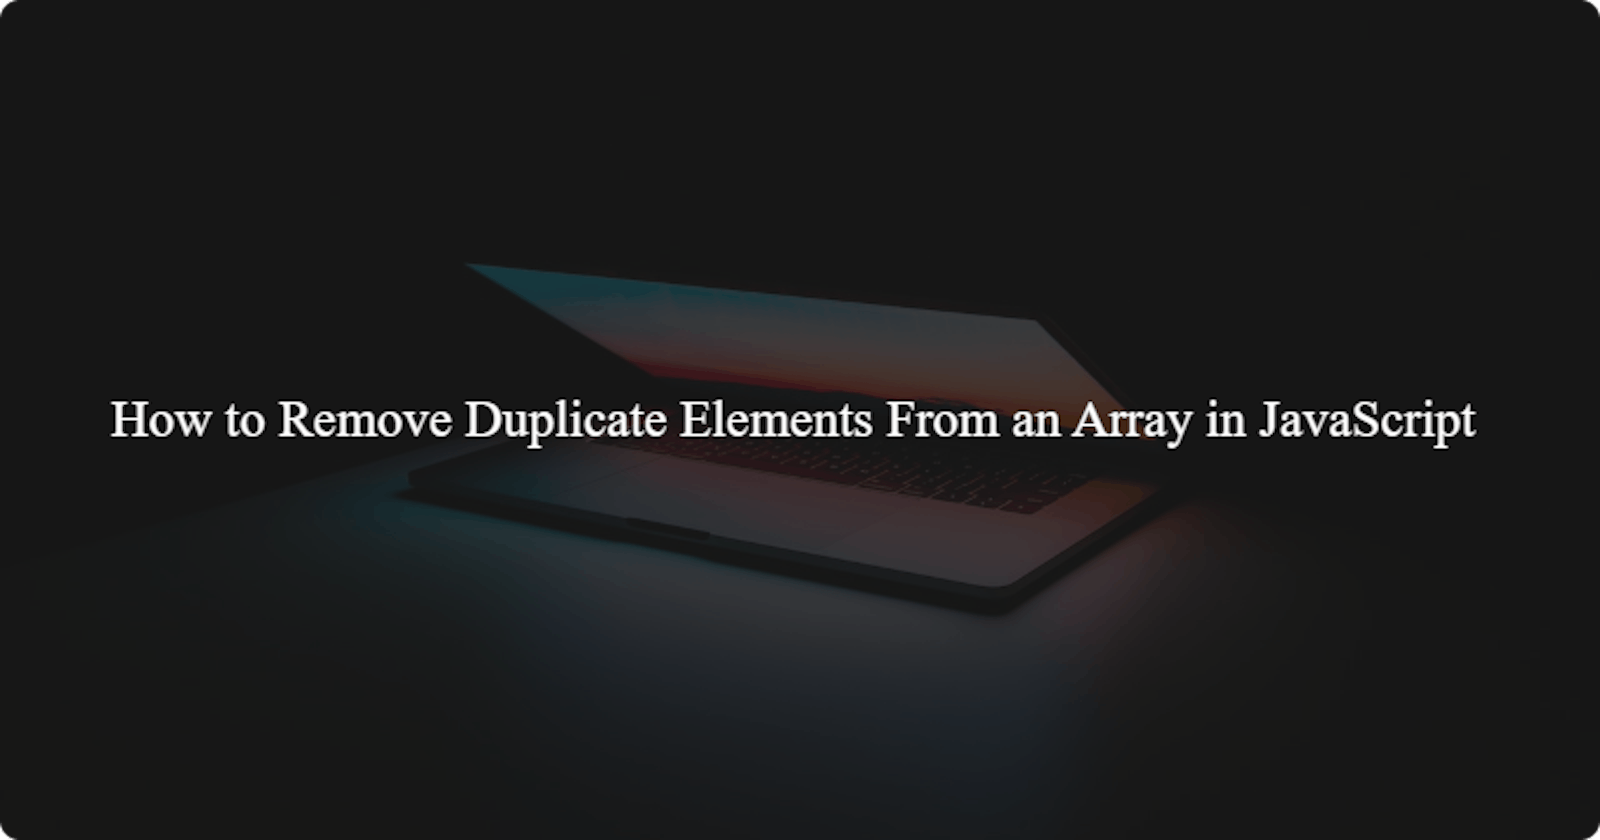 How to Remove Duplicate Elements From an Array in JavaScript